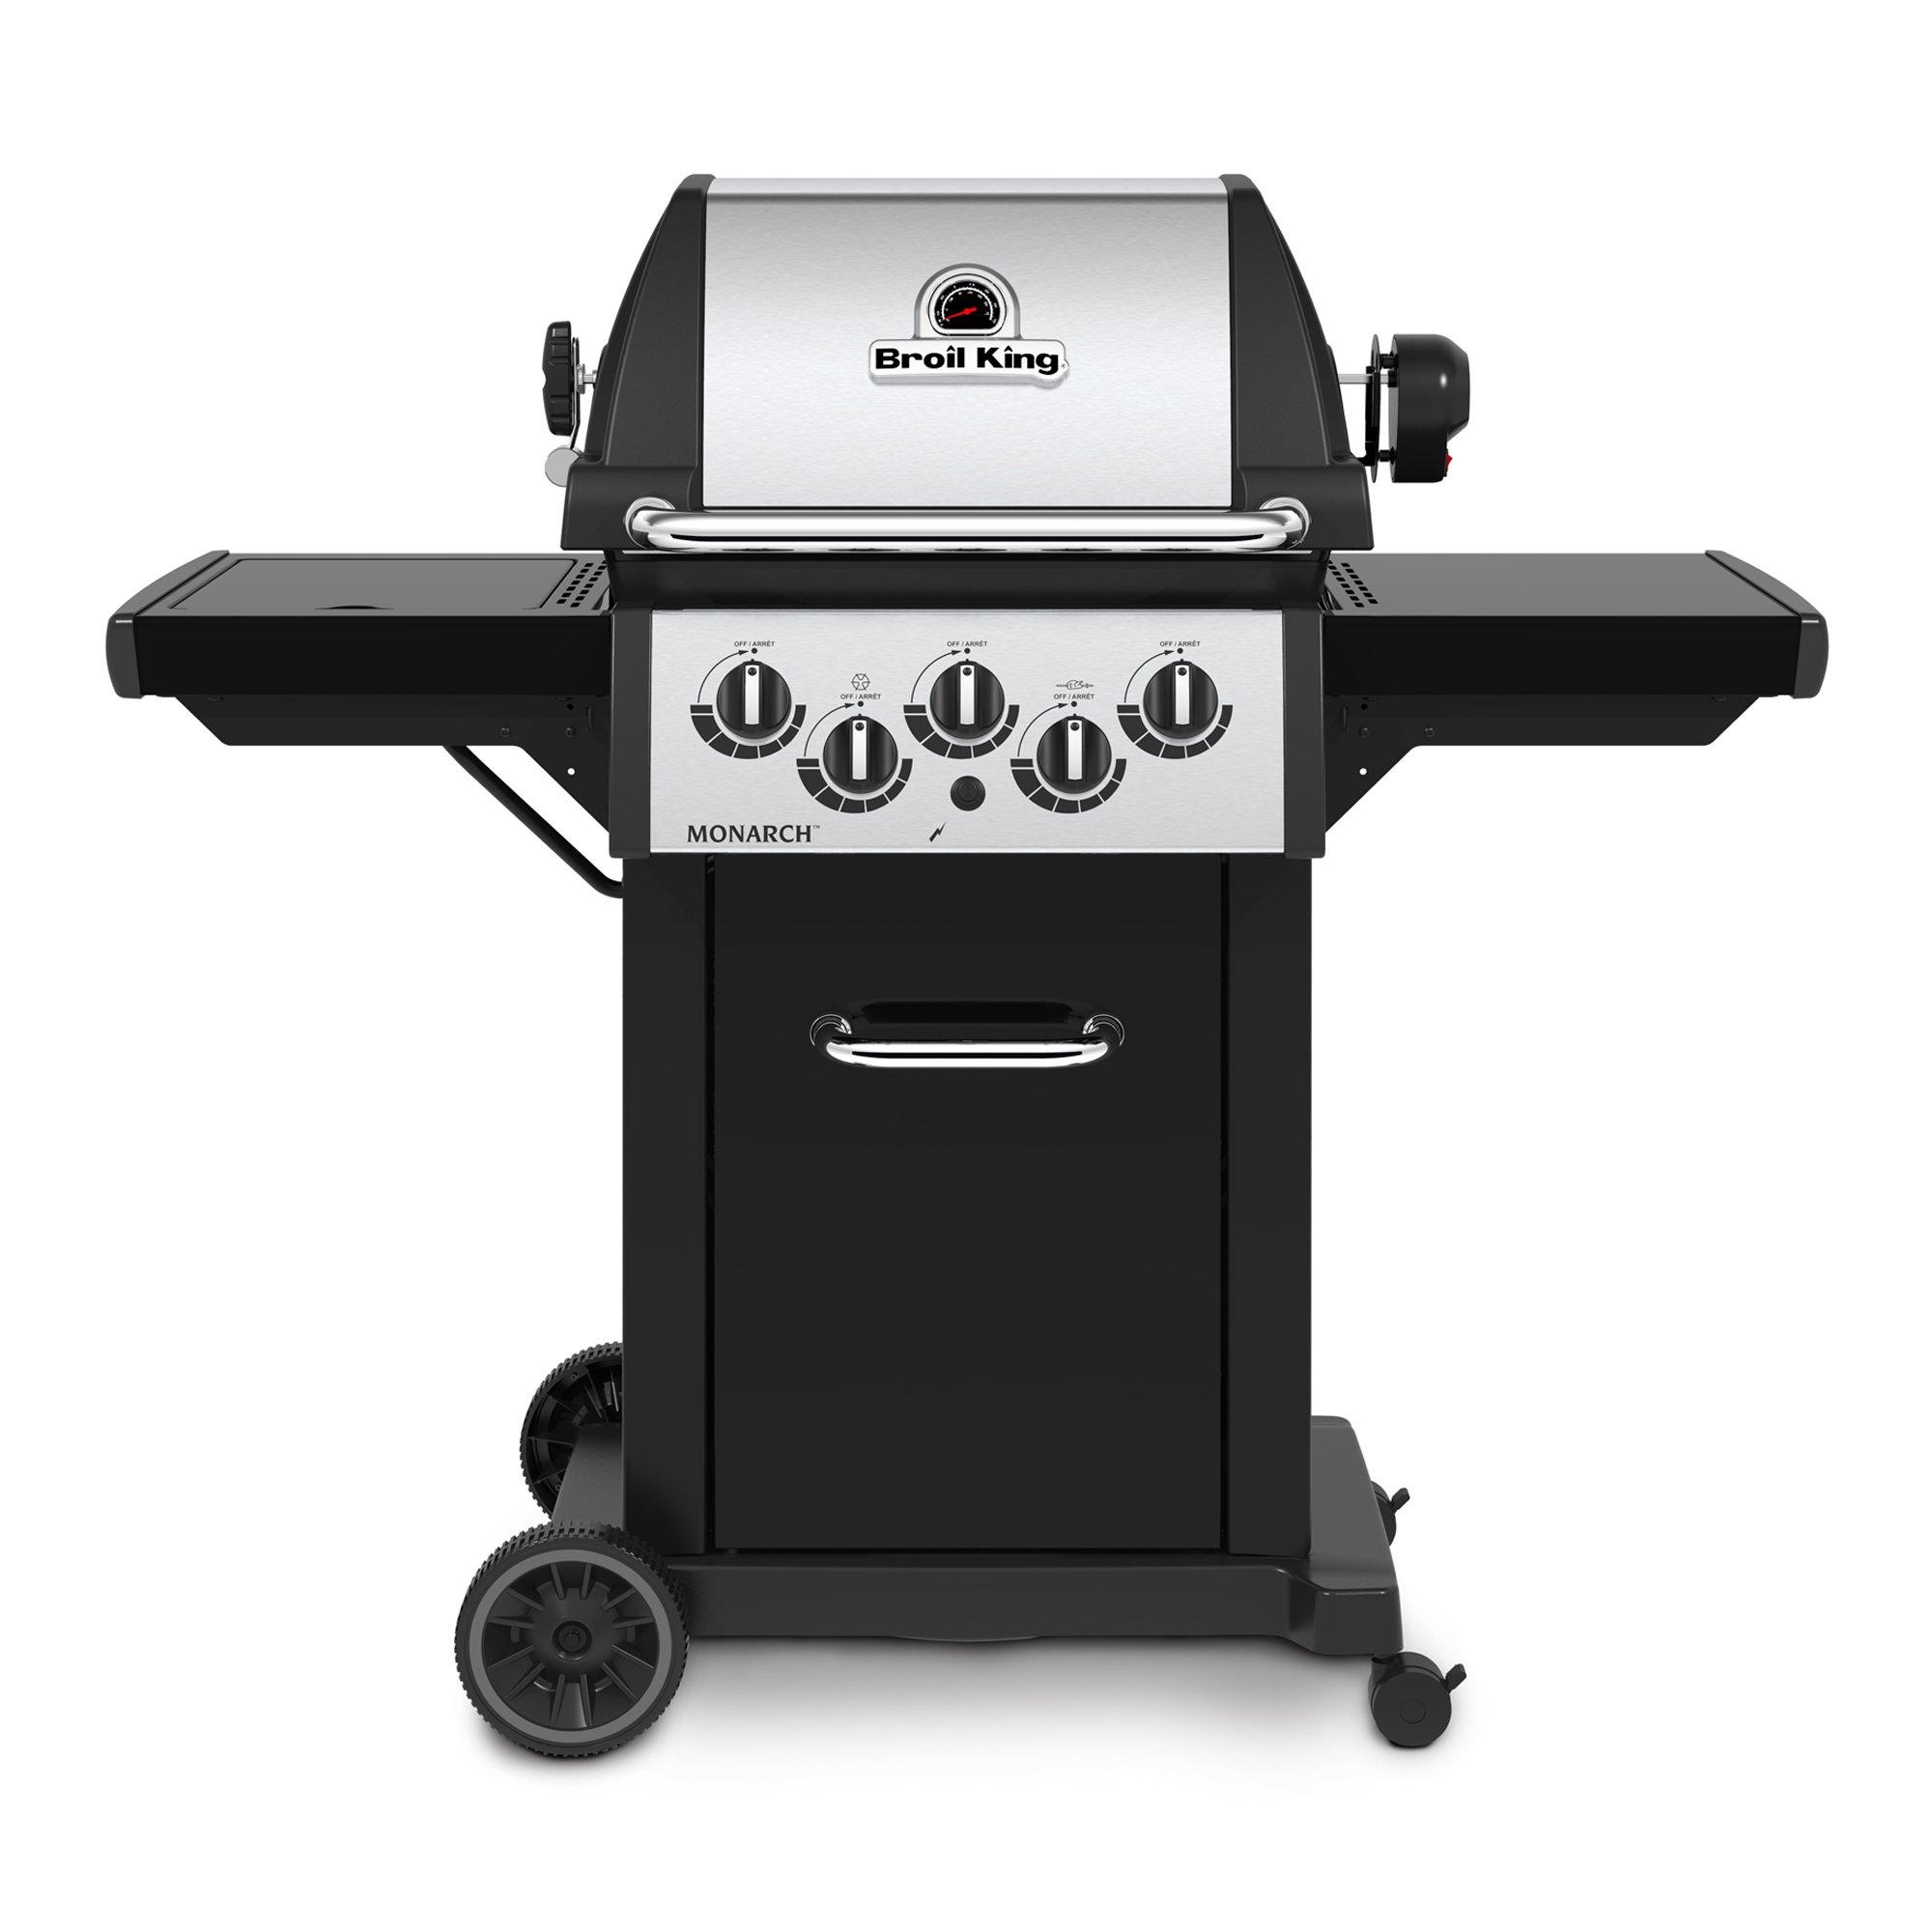 Image of Broil King Gasgrill Monarch 390 - 132X56X119CM